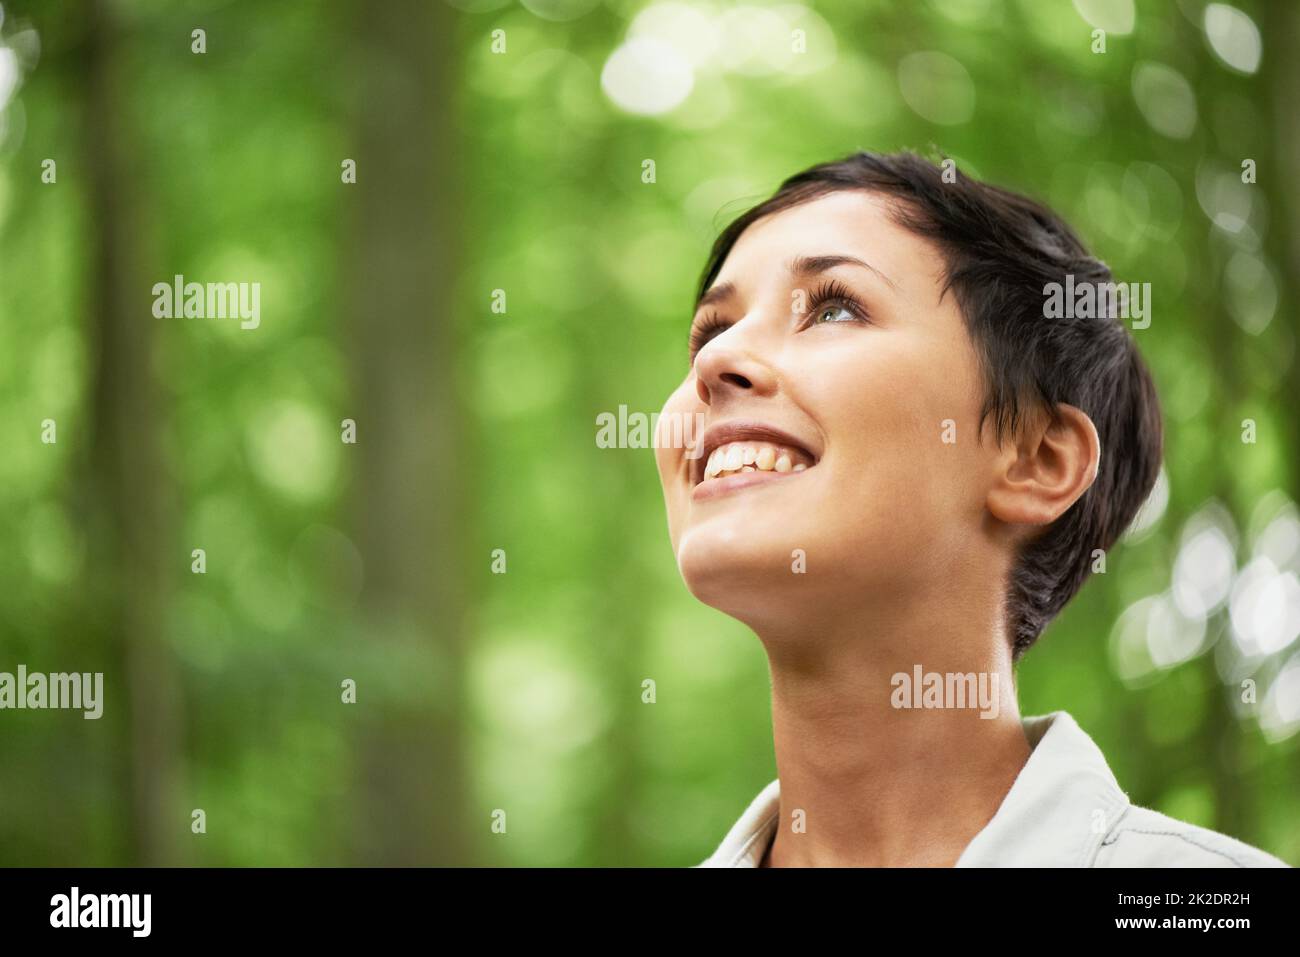 A love of all things in nature. A closeup shot of an attractive young woman looking upwards into the canopy of a forest. Stock Photo